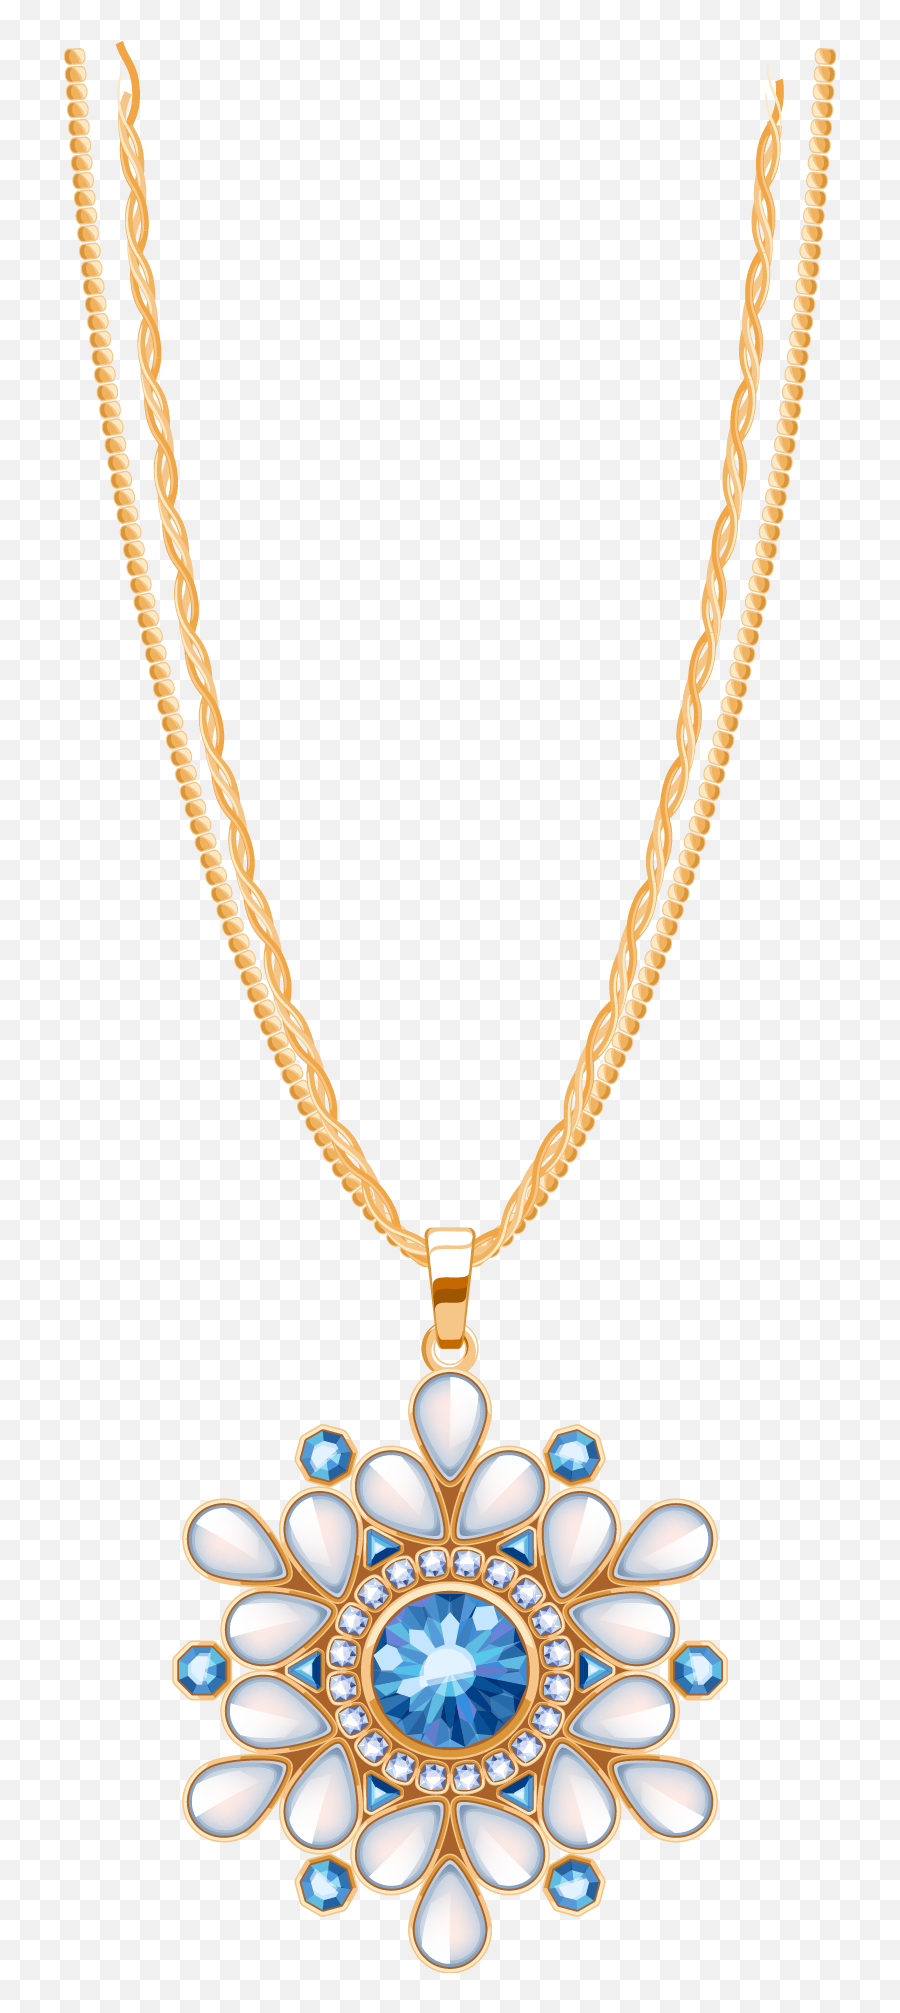 Download Diamond Chain Jewellery - Necklace Clipart Png Logo Emoji,Chain Necklace Png